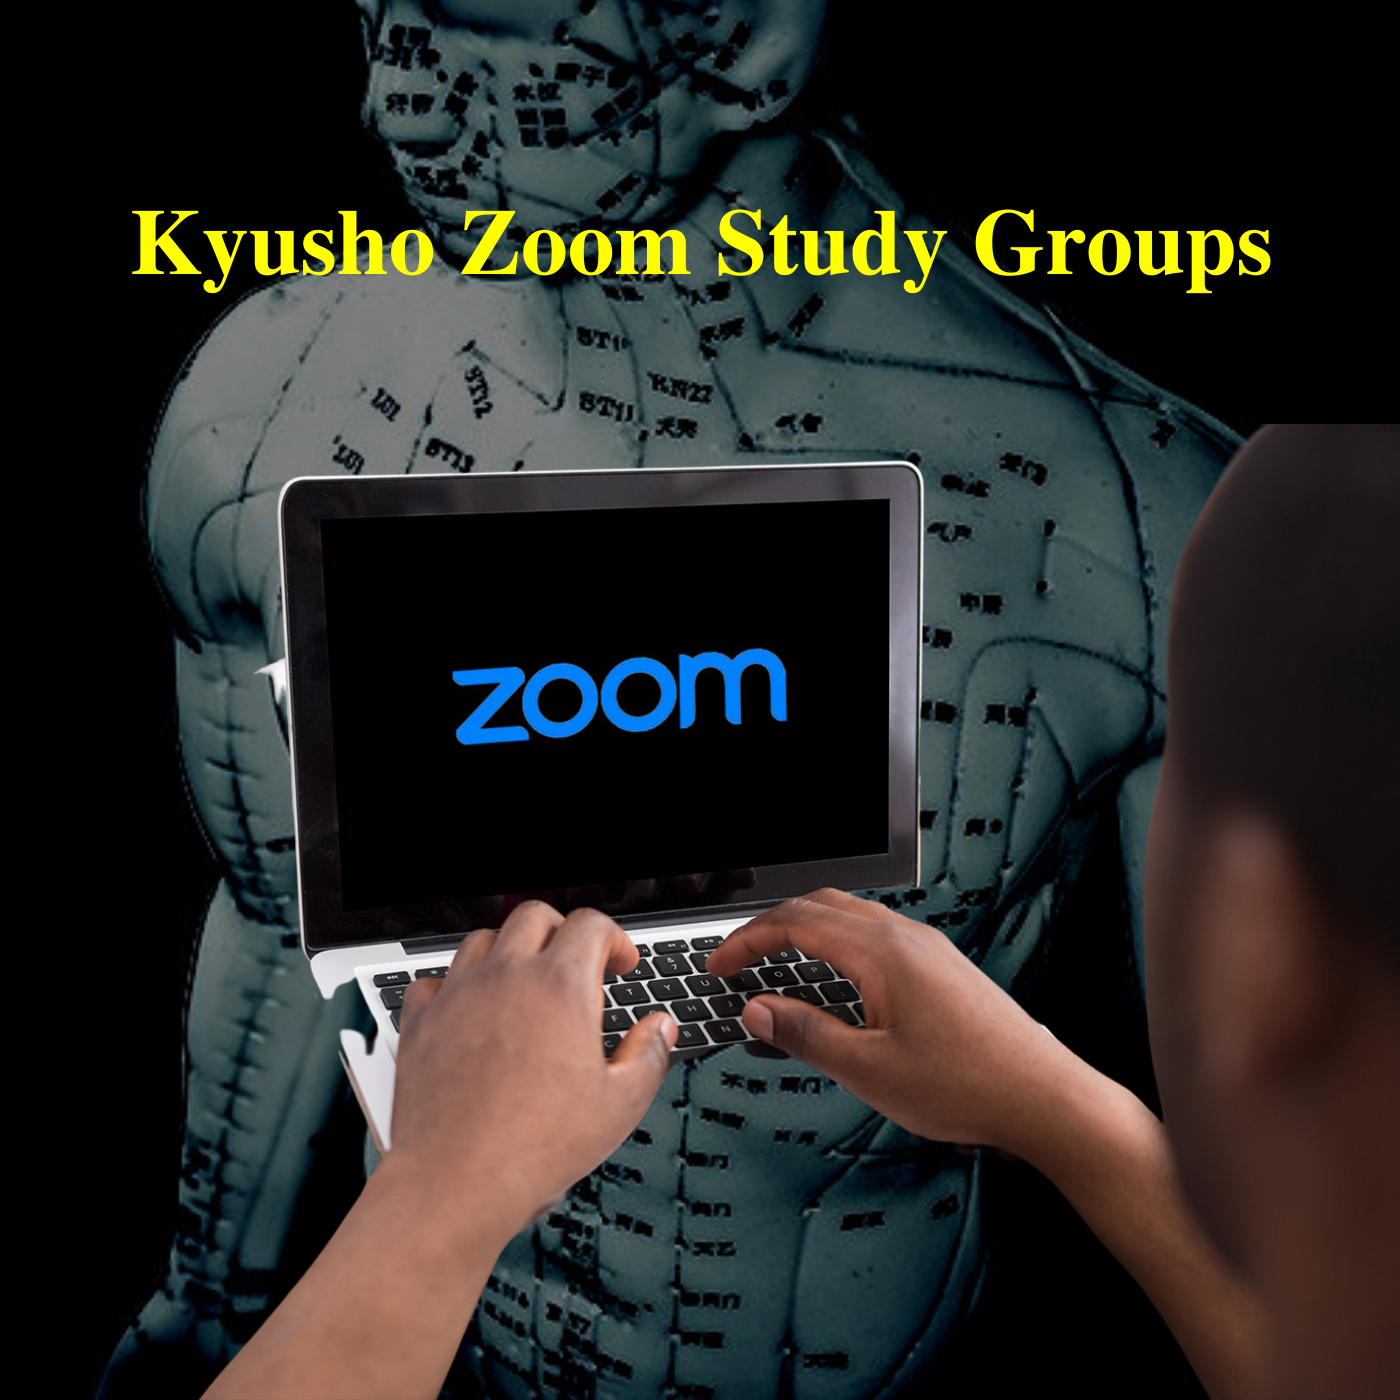 Kyusho Jitsu Study Groups by Zoom Conferencing